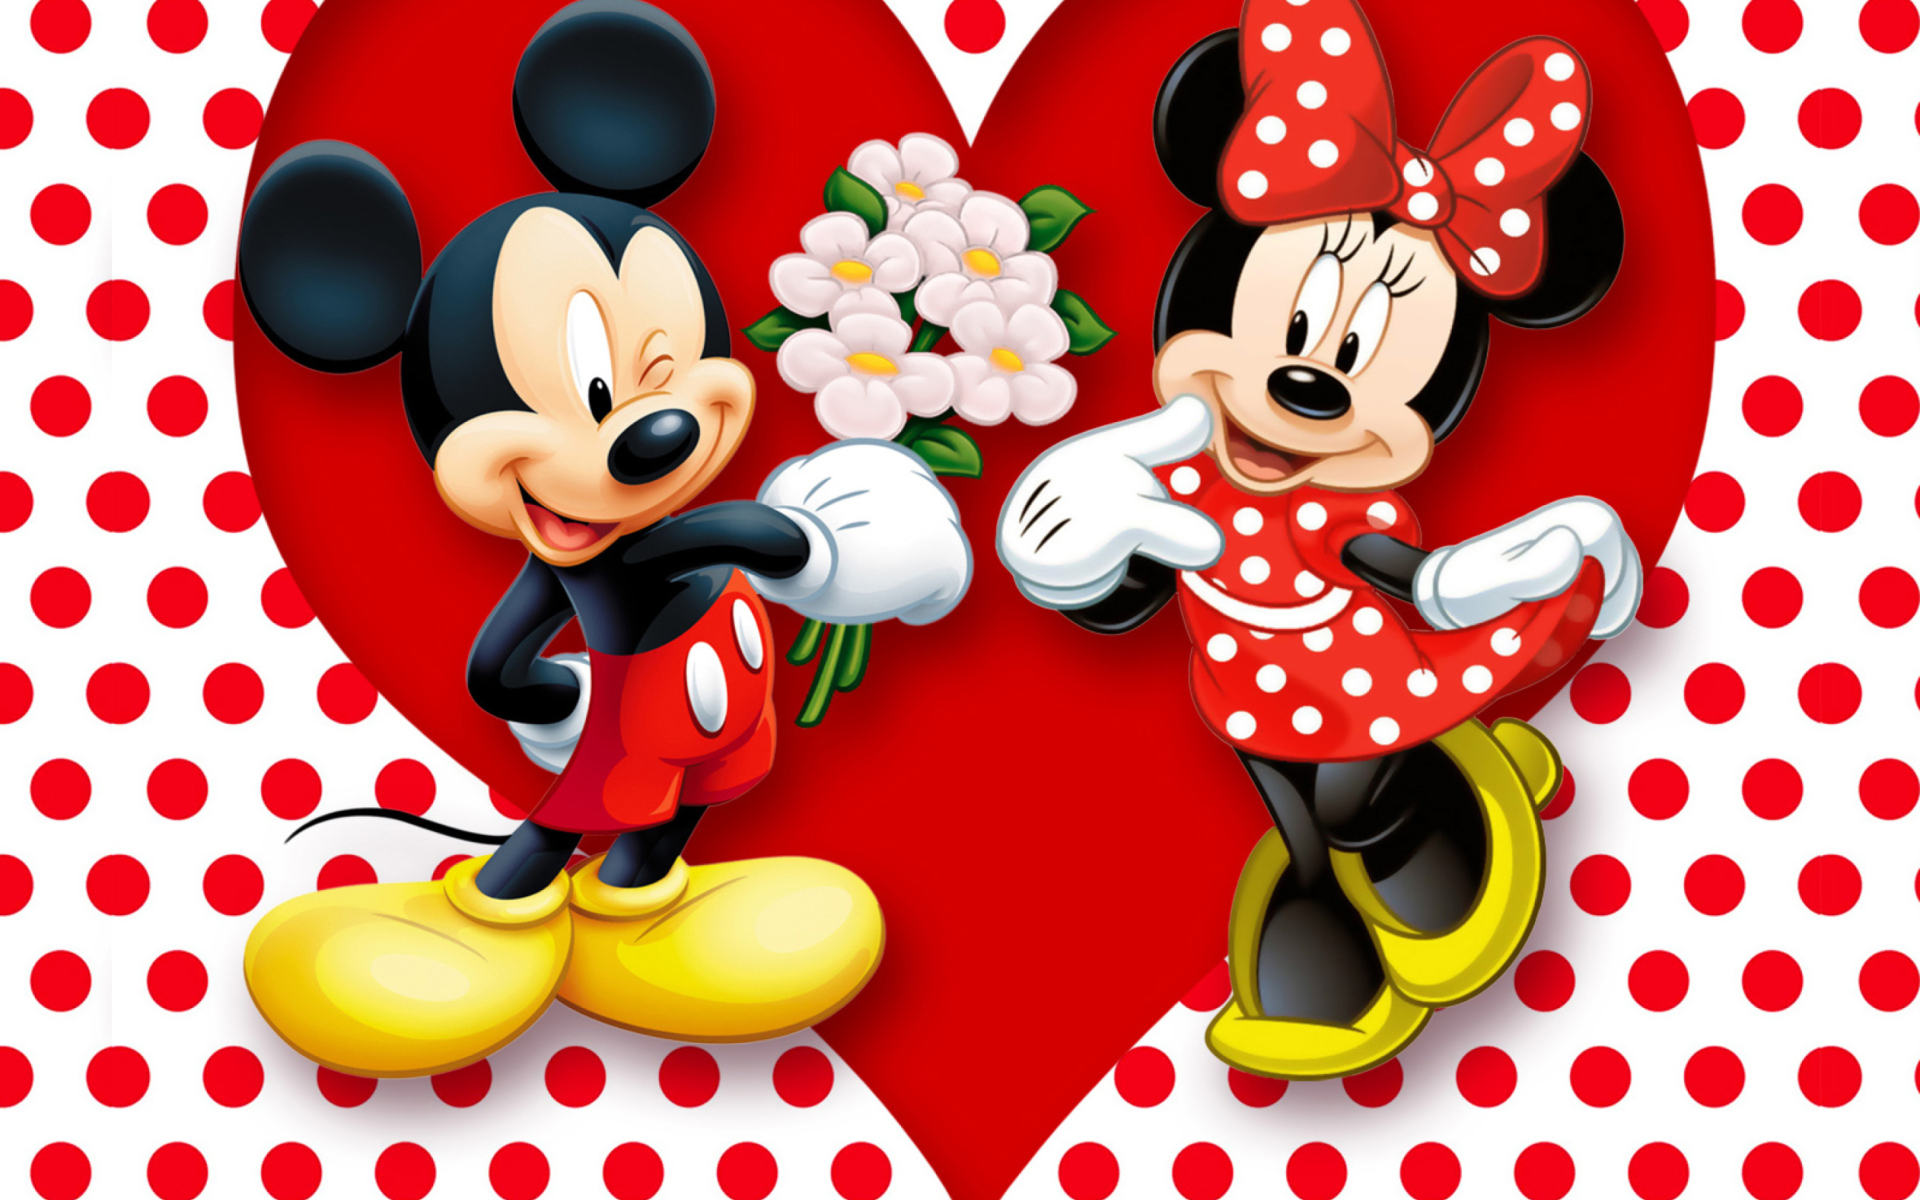 Minnie and mickey mouse wallpapers